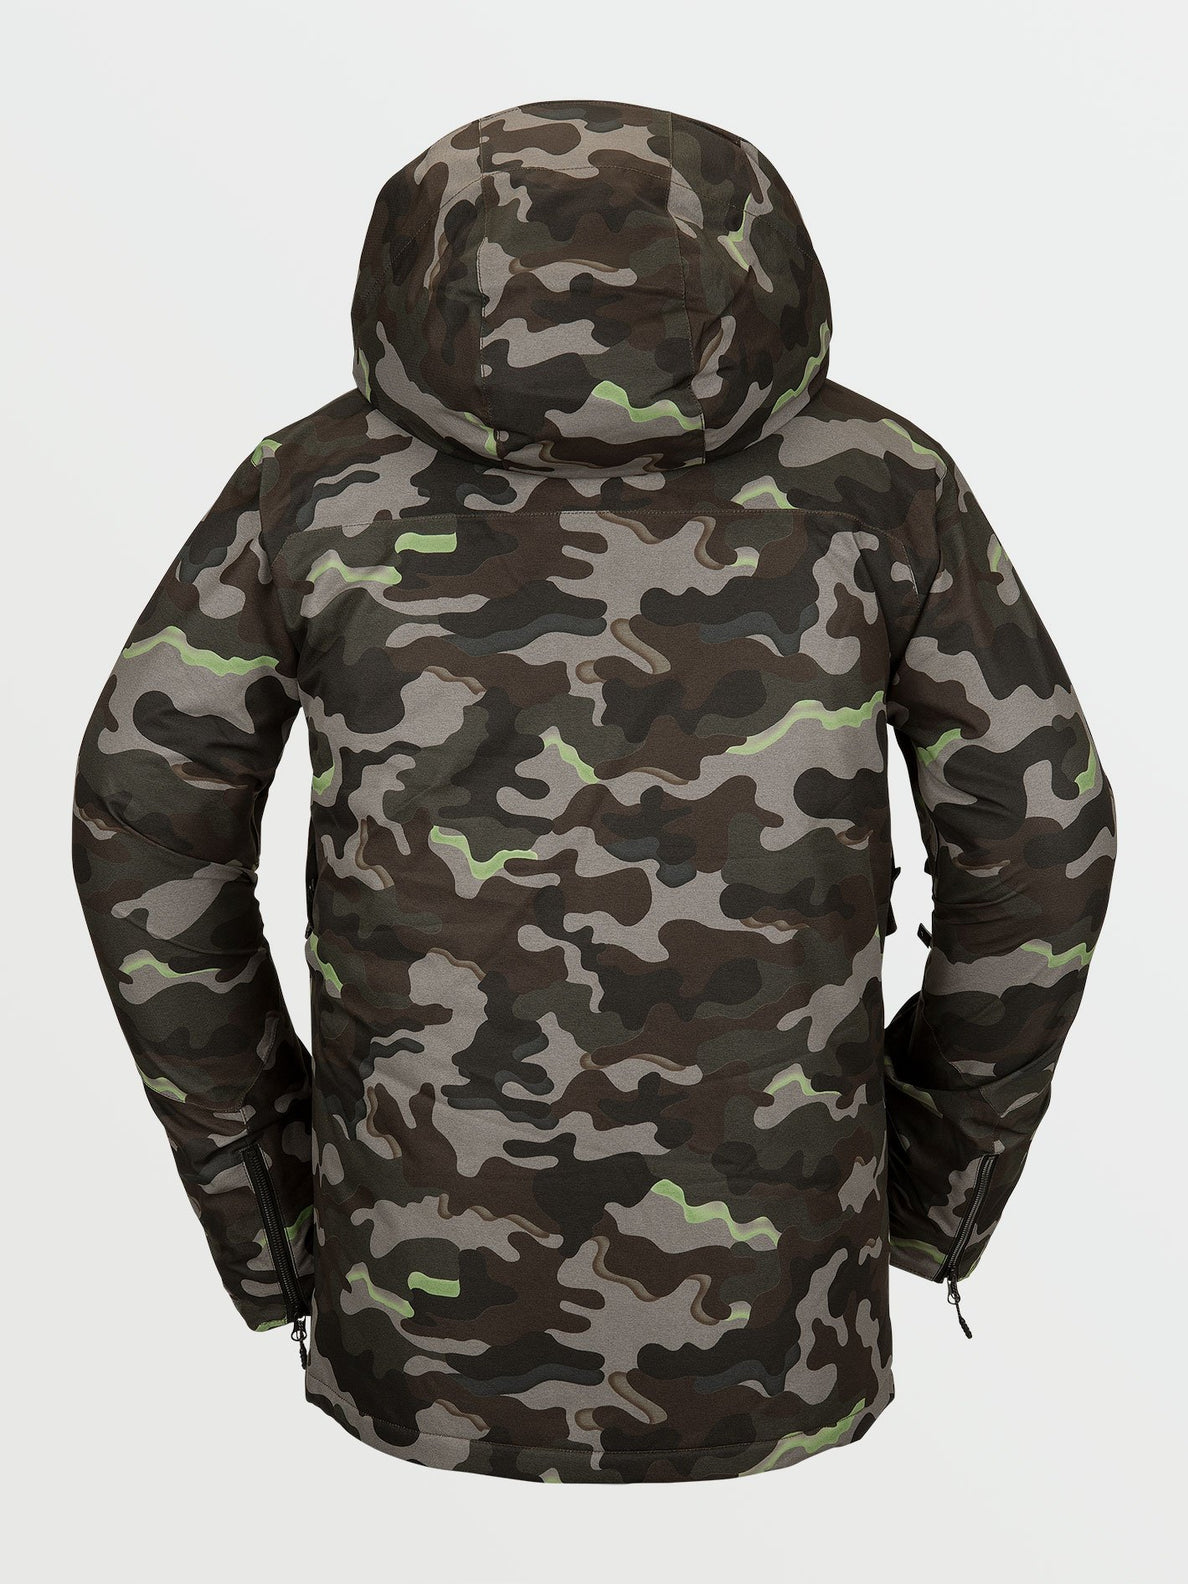 ANDERS 2L TDS JACKET (G0452106_ARM) [B]